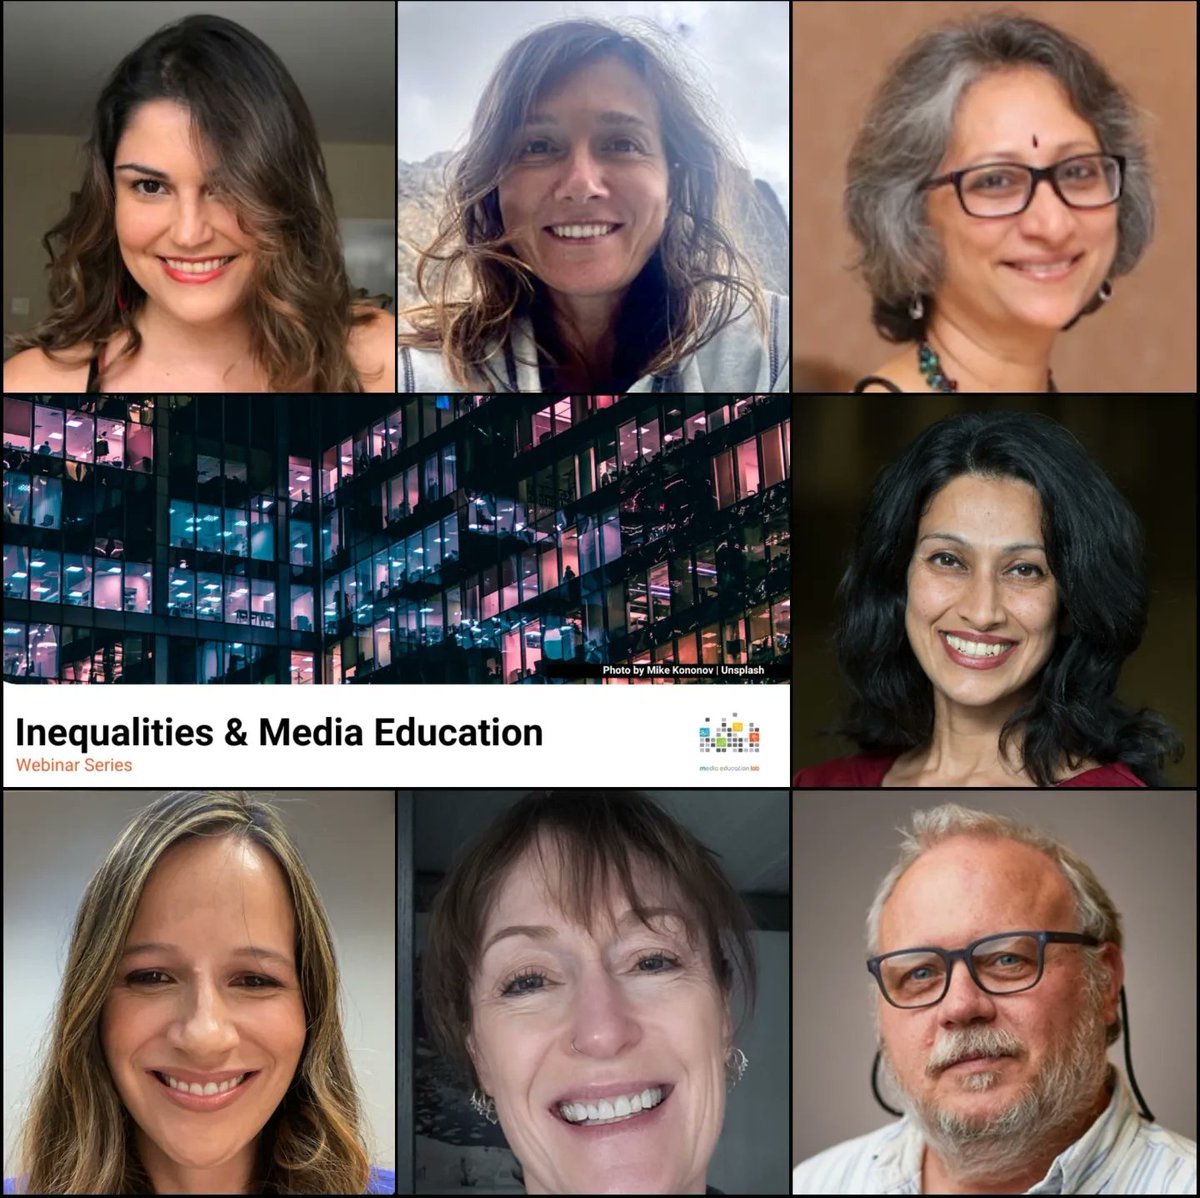 Join us for FemWork: Inequalities & Media Education Webinar Series @MedEduLab
Profs @usharaman @3Lmantra founders of @FemlabC discuss the future of work & debates of inclusion equity & dignity emerging in the digital society
🗓️ Today
⏰ 12 pm EST
REGISTER: mediaeducationlab.com/femwork